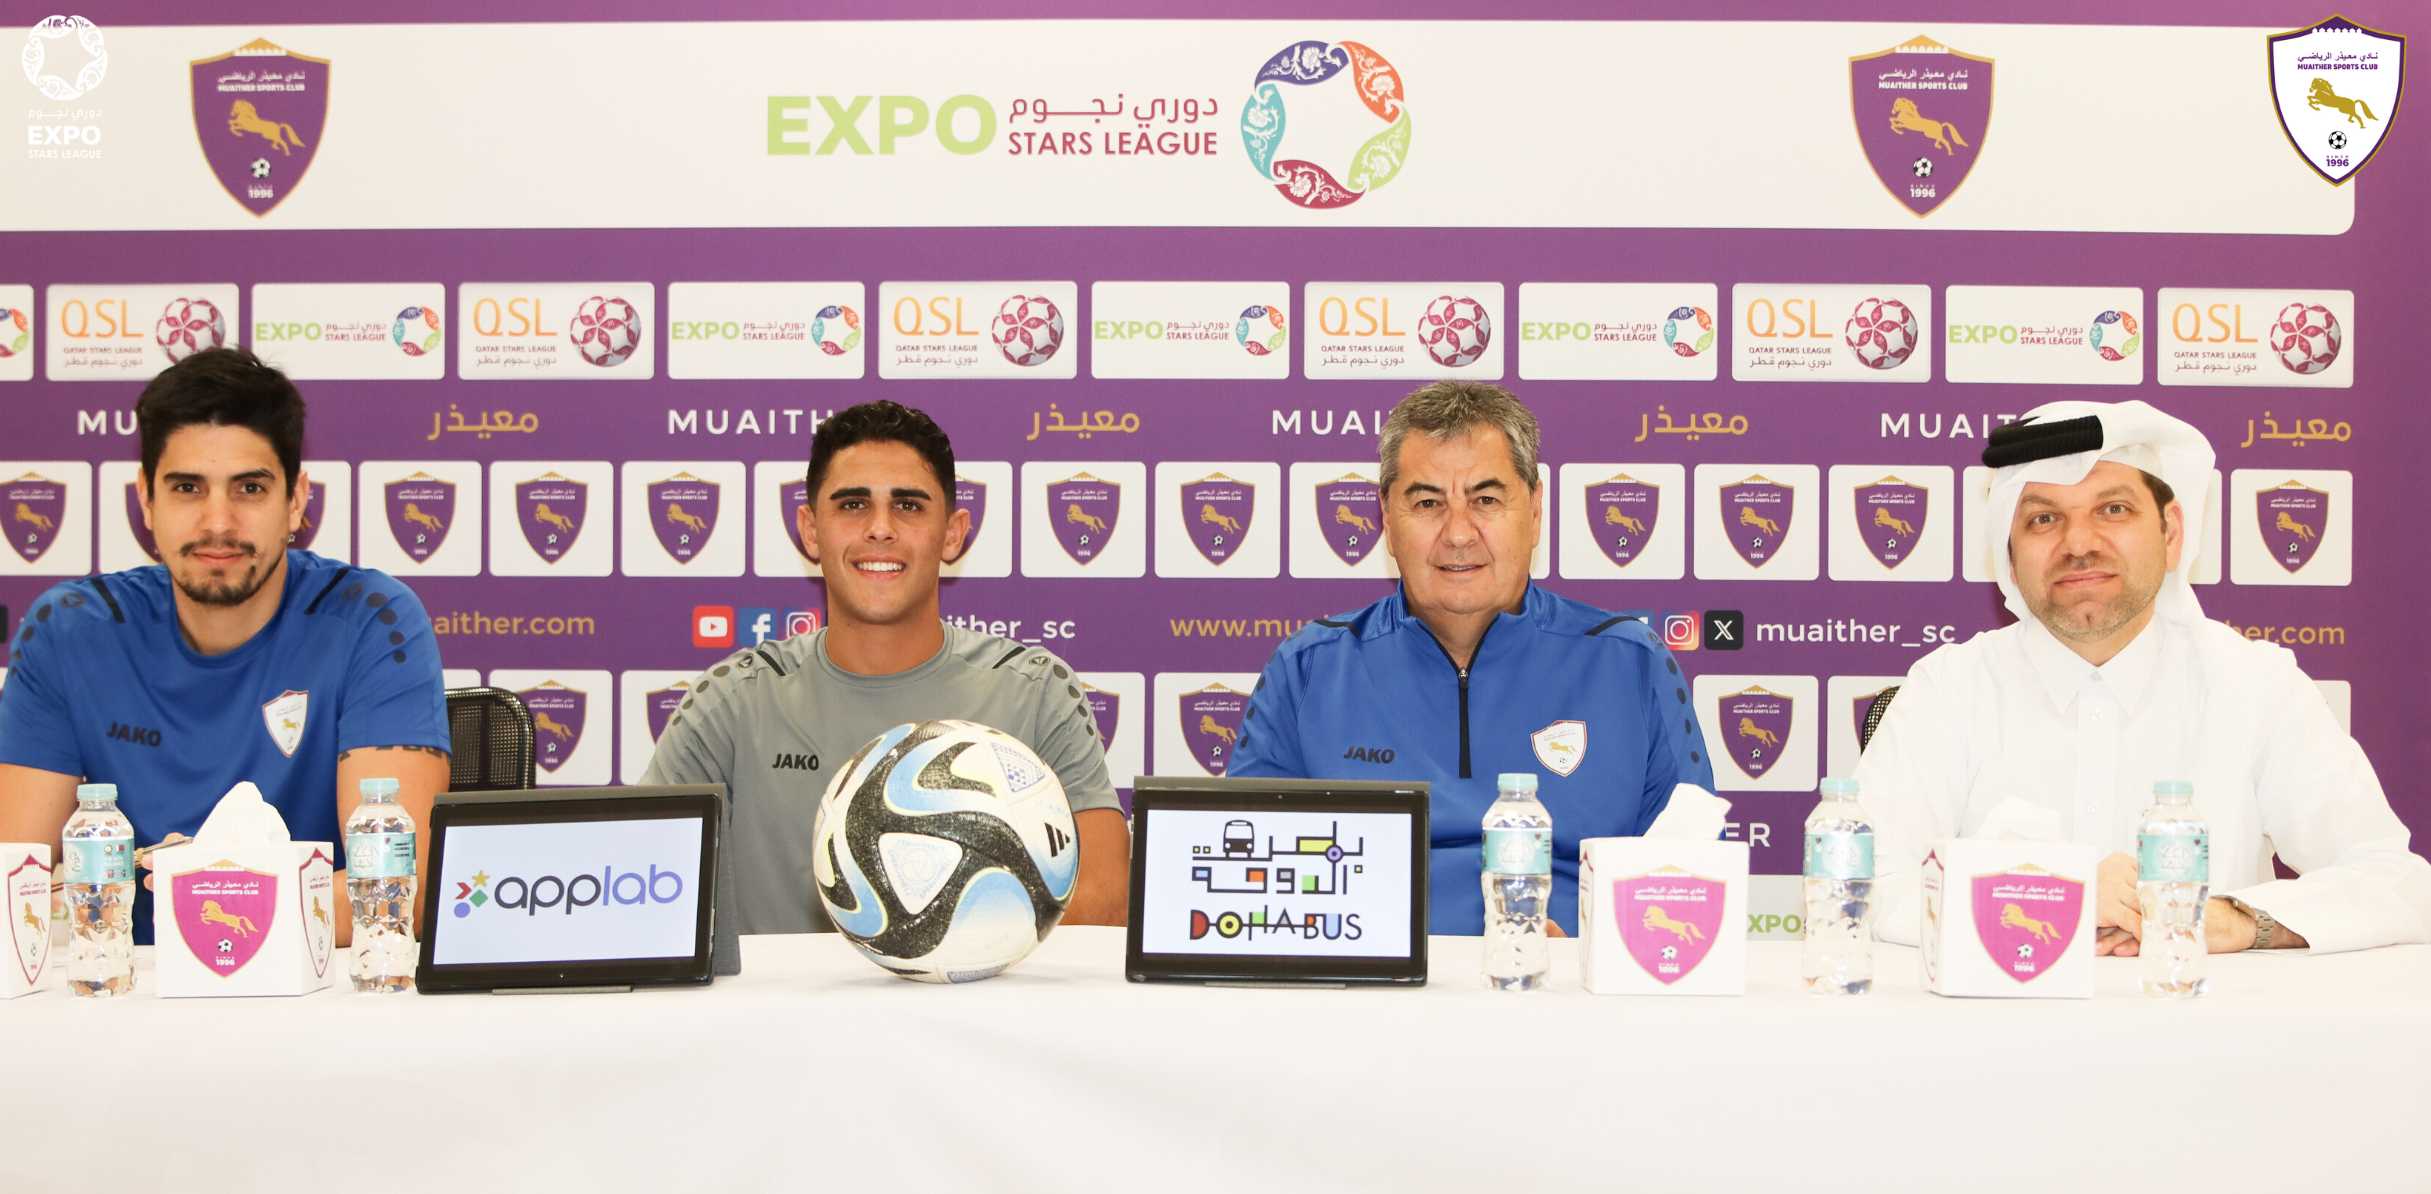 Jorge da Silva: I am happy to be in Qatar, and the Al Rayyan match is difficult